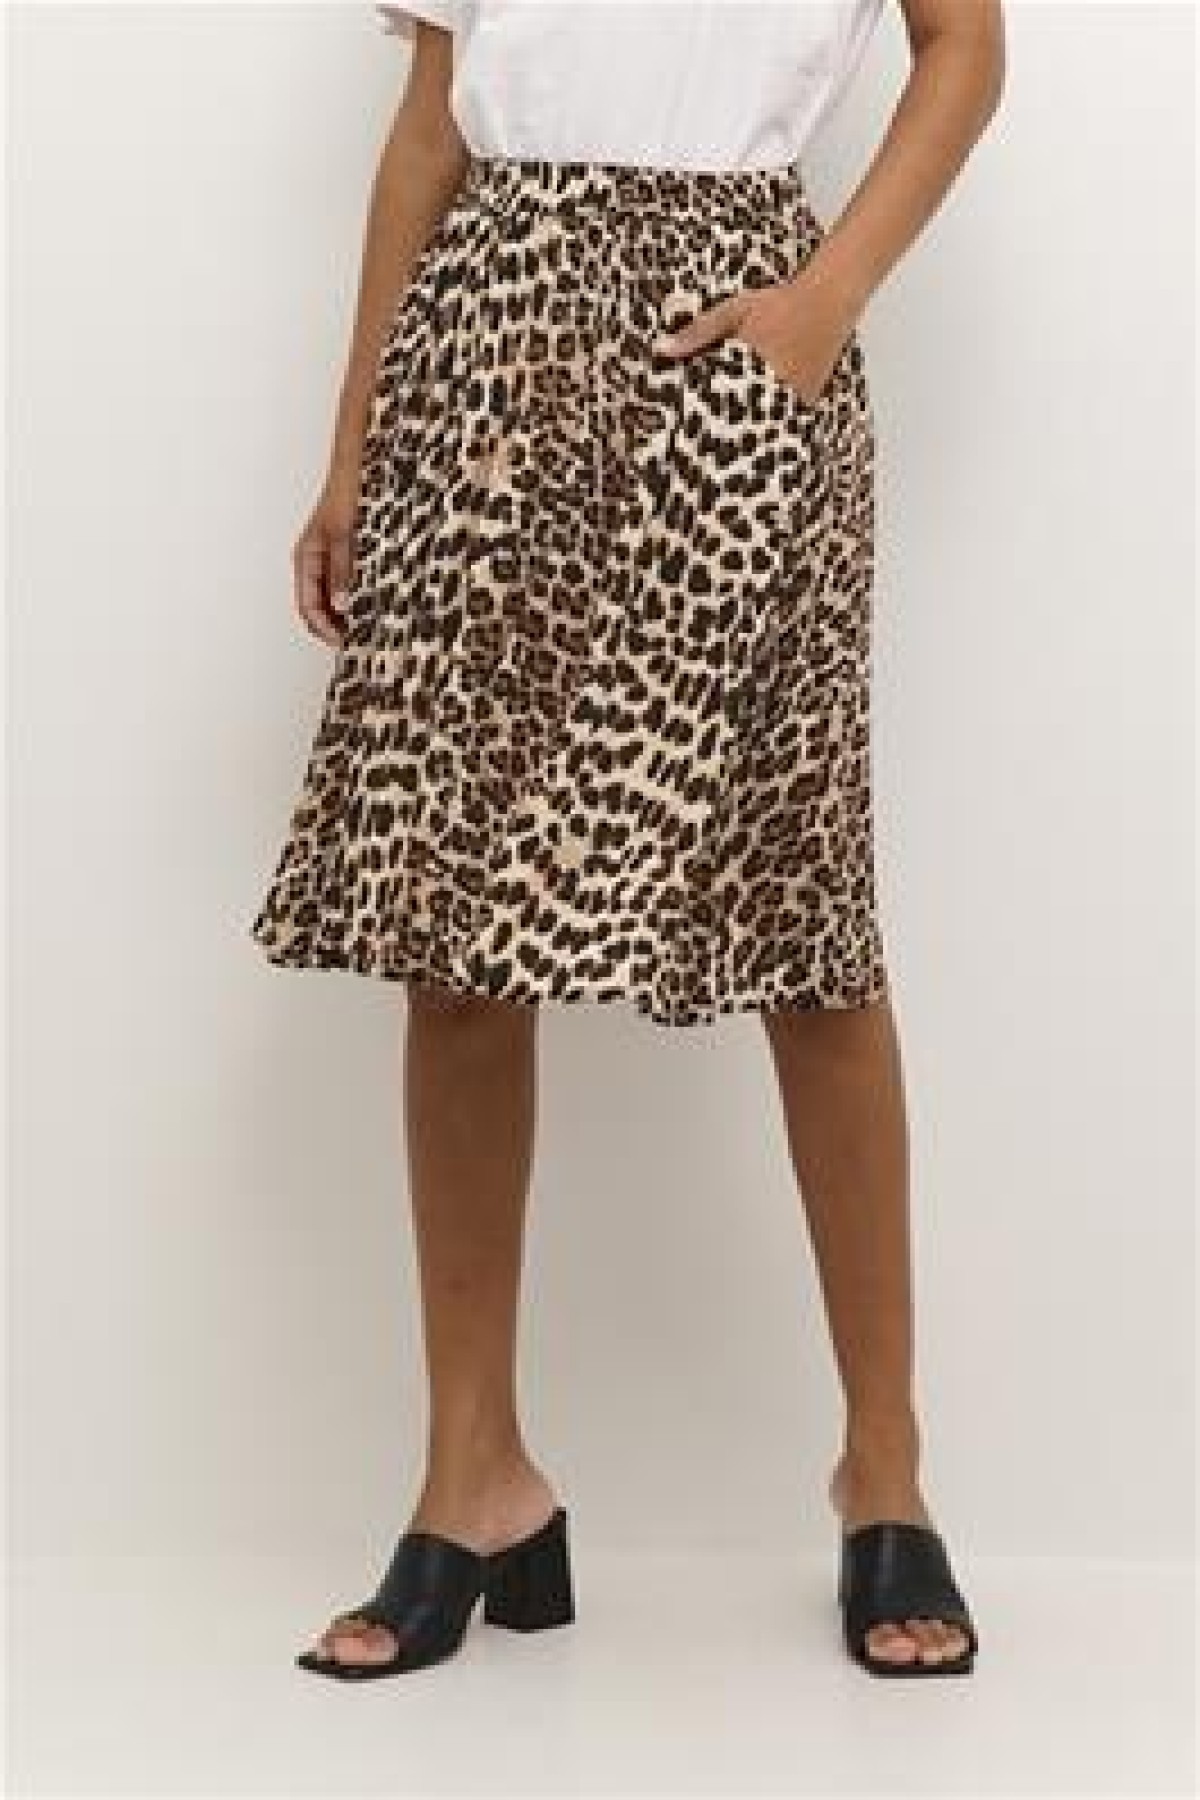 LEOPARD SKIRT WITH POCKETS AND ELASTIC WAIST